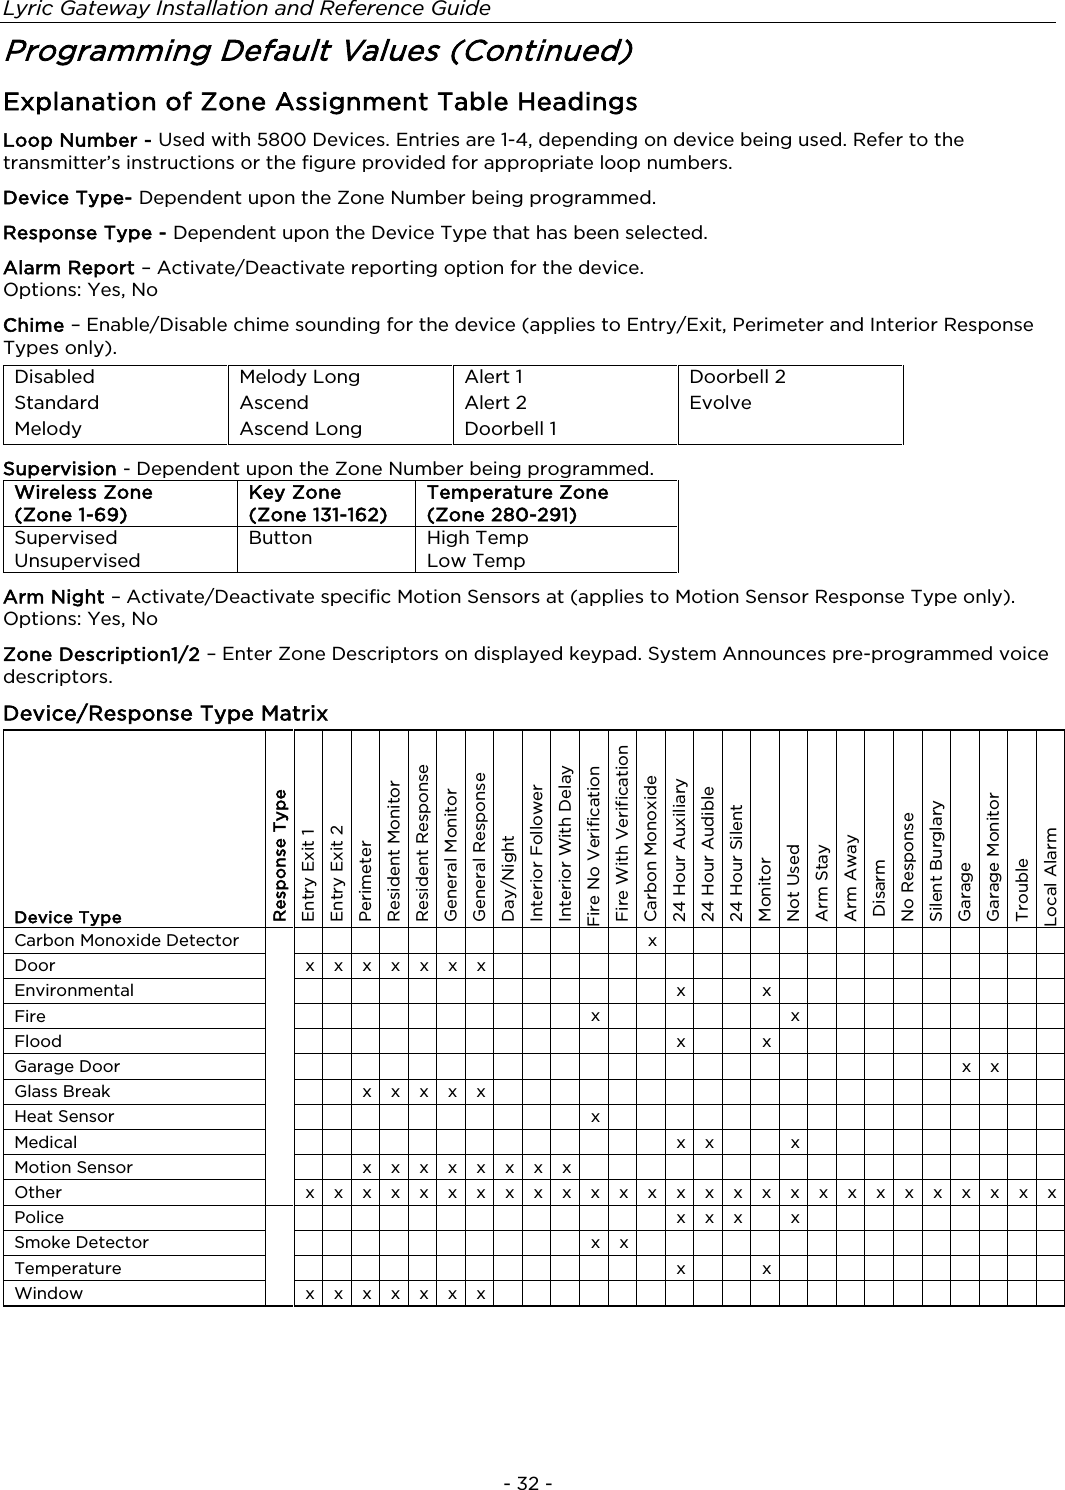 Lyric Gateway Installation and Reference Guide  - 32 - Programming Default Values (Continued) Explanation of Zone Assignment Table Headings Loop Number - Used with 5800 Devices. Entries are 1-4, depending on device being used. Refer to the transmitter’s instructions or the figure provided for appropriate loop numbers. Device Type- Dependent upon the Zone Number being programmed. Response Type - Dependent upon the Device Type that has been selected. Alarm Report – Activate/Deactivate reporting option for the device. Options: Yes, No Chime – Enable/Disable chime sounding for the device (applies to Entry/Exit, Perimeter and Interior Response Types only). Disabled Melody Long Alert 1 Doorbell 2 Standard Ascend Alert 2 Evolve Melody Ascend Long Doorbell 1  Supervision - Dependent upon the Zone Number being programmed. Wireless Zone (Zone 1-69) Key Zone (Zone 131-162) Temperature Zone (Zone 280-291) Supervised Button High Temp Unsupervised  Low Temp Arm Night – Activate/Deactivate specific Motion Sensors at (applies to Motion Sensor Response Type only).  Options: Yes, No Zone Description1/2 – Enter Zone Descriptors on displayed keypad. System Announces pre-programmed voice descriptors.  Device/Response Type Matrix Device Type  Response Type  Entry Exit 1  Entry Exit 2  Perimeter  Resident Monitor  Resident Response  General Monitor  General Response  Day/Night  Interior Follower  Interior With Delay Fire No Verification  Fire With Verification  Carbon Monoxide  24 Hour Auxiliary  24 Hour Audible  24 Hour Silent  Monitor  Not Used  Arm Stay  Arm Away   Disarm  No Response  Silent Burglary  Garage  Garage Monitor  Trouble Local Alarm Carbon Monoxide Detector              x               Door  x x x x x x x                     Environmental               x   x           Fire            x       x          Flood               x   x             Garage Door                         x  x     Glass Break    x  x  x  x  x                       Heat Sensor            x                   Medical               x  x   x            Motion Sensor    x  x  x  x  x  x  x  x                    Other  x  x  x  x  x  x  x  x  x  x  x  x  x  x  x  x  x  x  x  x  x  x  x  x  x  x  x Police               x x x  x          Smoke Detector            x x                Temperature               x   x           Window  x  x  x  x  x  x  x                        